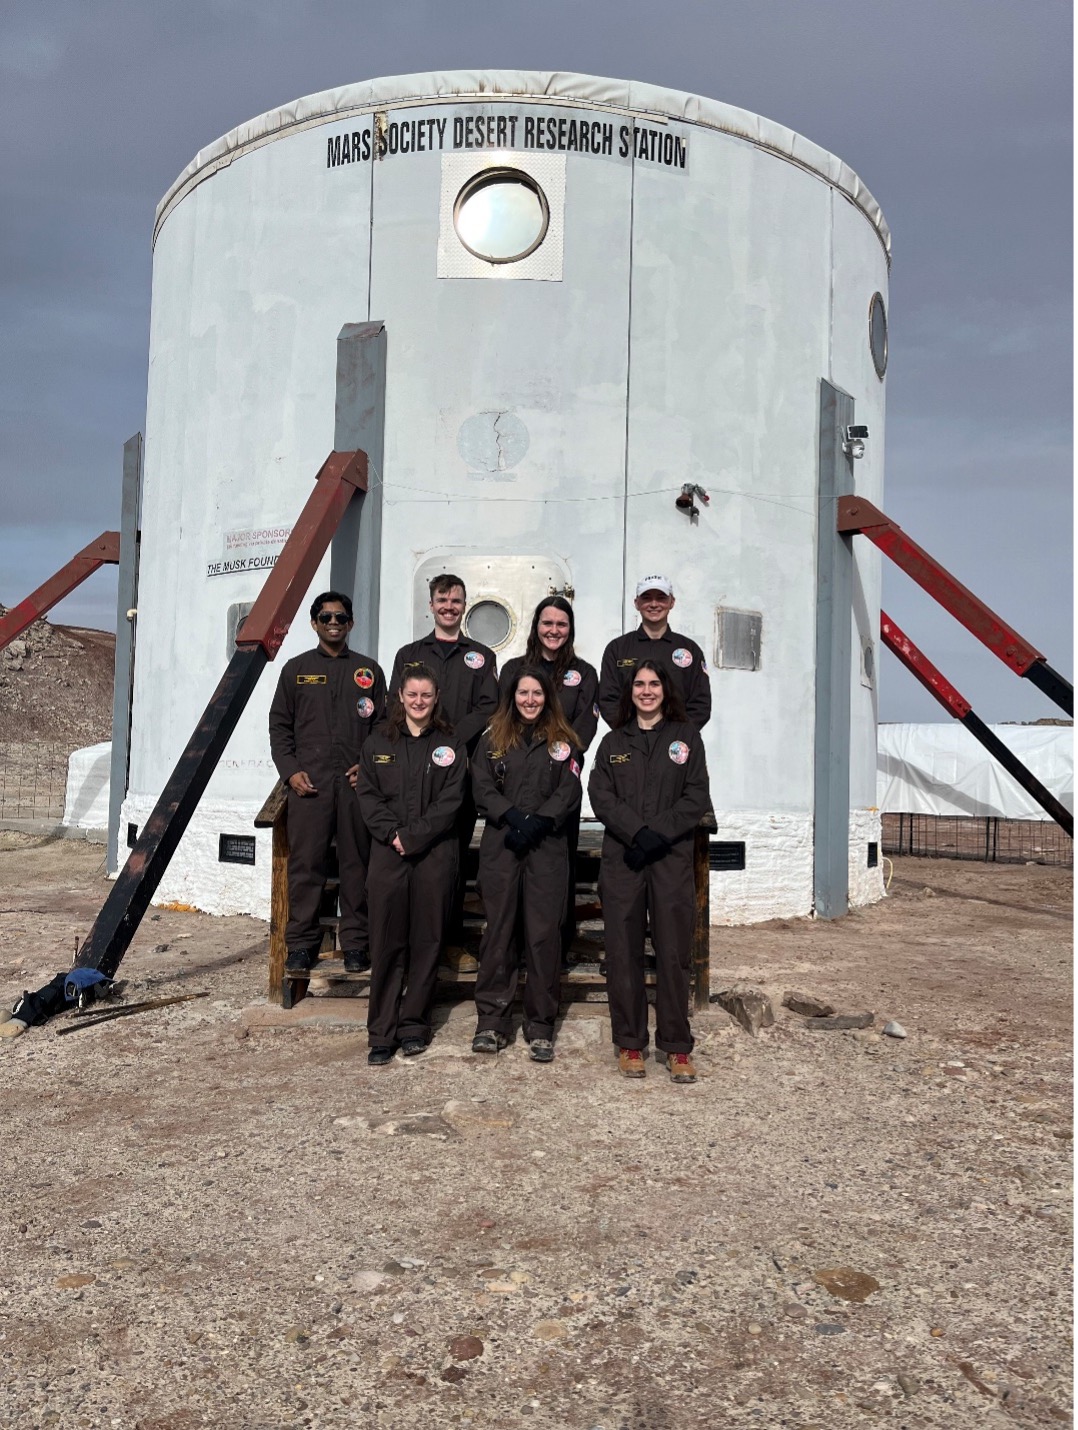 group photo of the crew in front of the MDRS